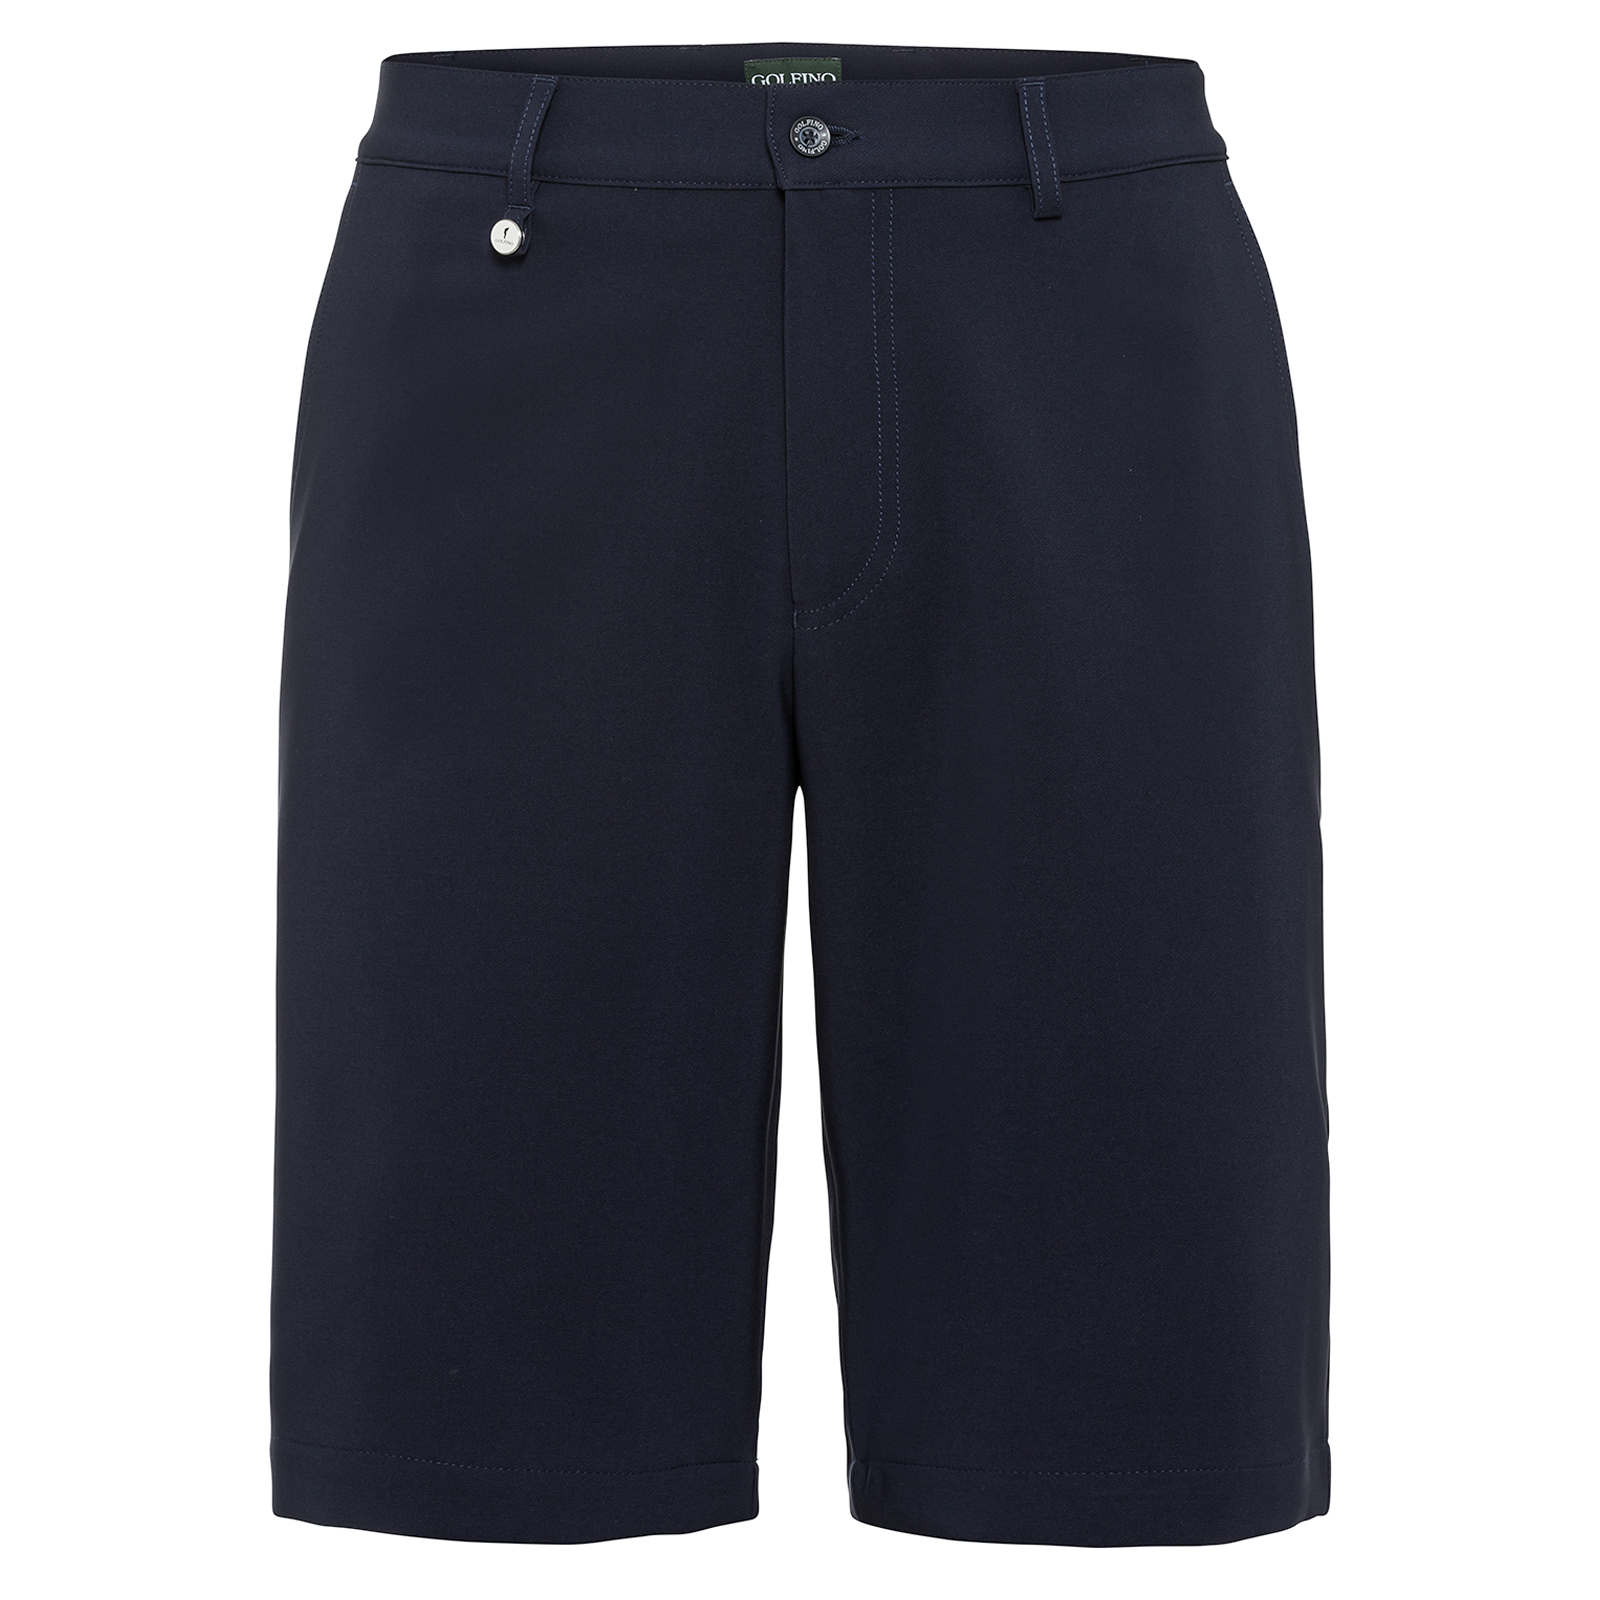 Men's Bermuda shorts with stretch component